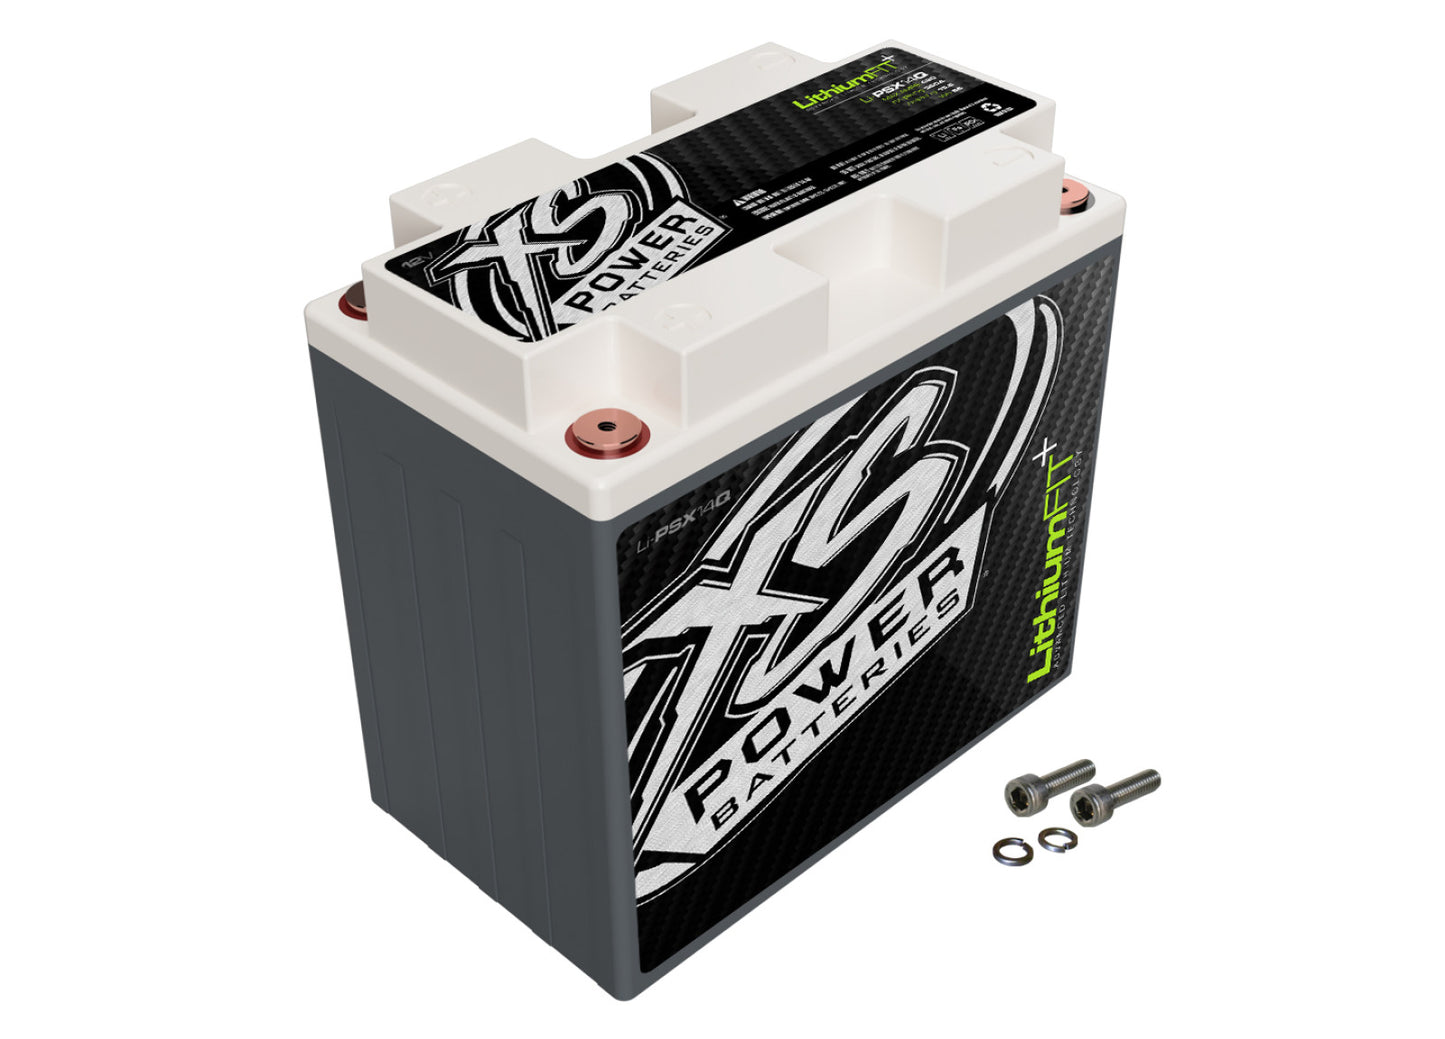 XS Power Batteries Lithium Powersports Series Batteries - M6 Terminal Bolts Included 480 Max Amps